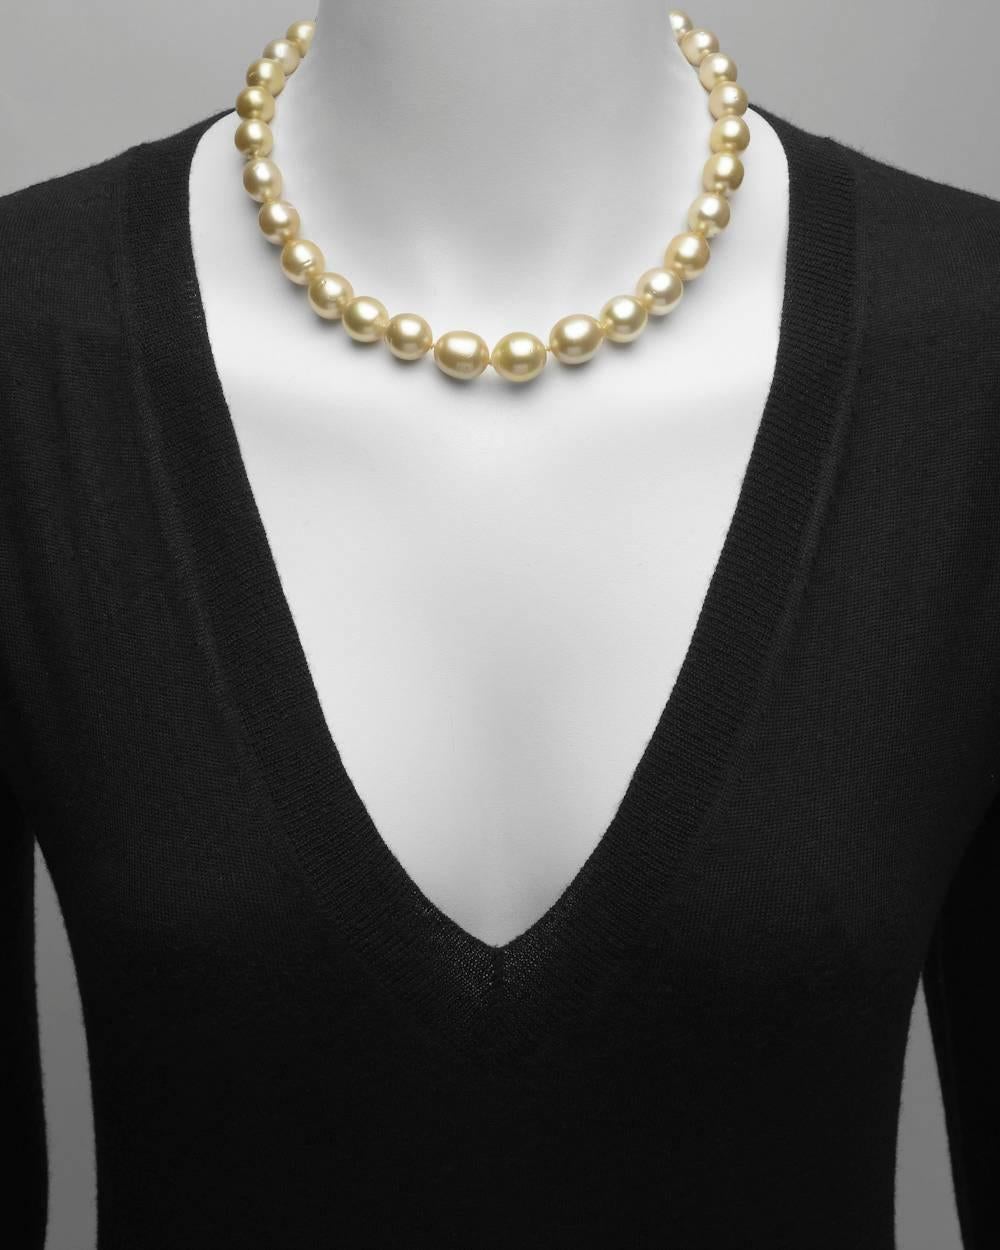 Golden South Sea pearl necklace, composed of 33 cultured pearls ranging from 13.7mm to 9.7mm in diameter, strung on a hand-knotted silk cord, secured by an 18k yellow gold and pavé yellow sapphire ball clasp with two round diamond accents. Yellow